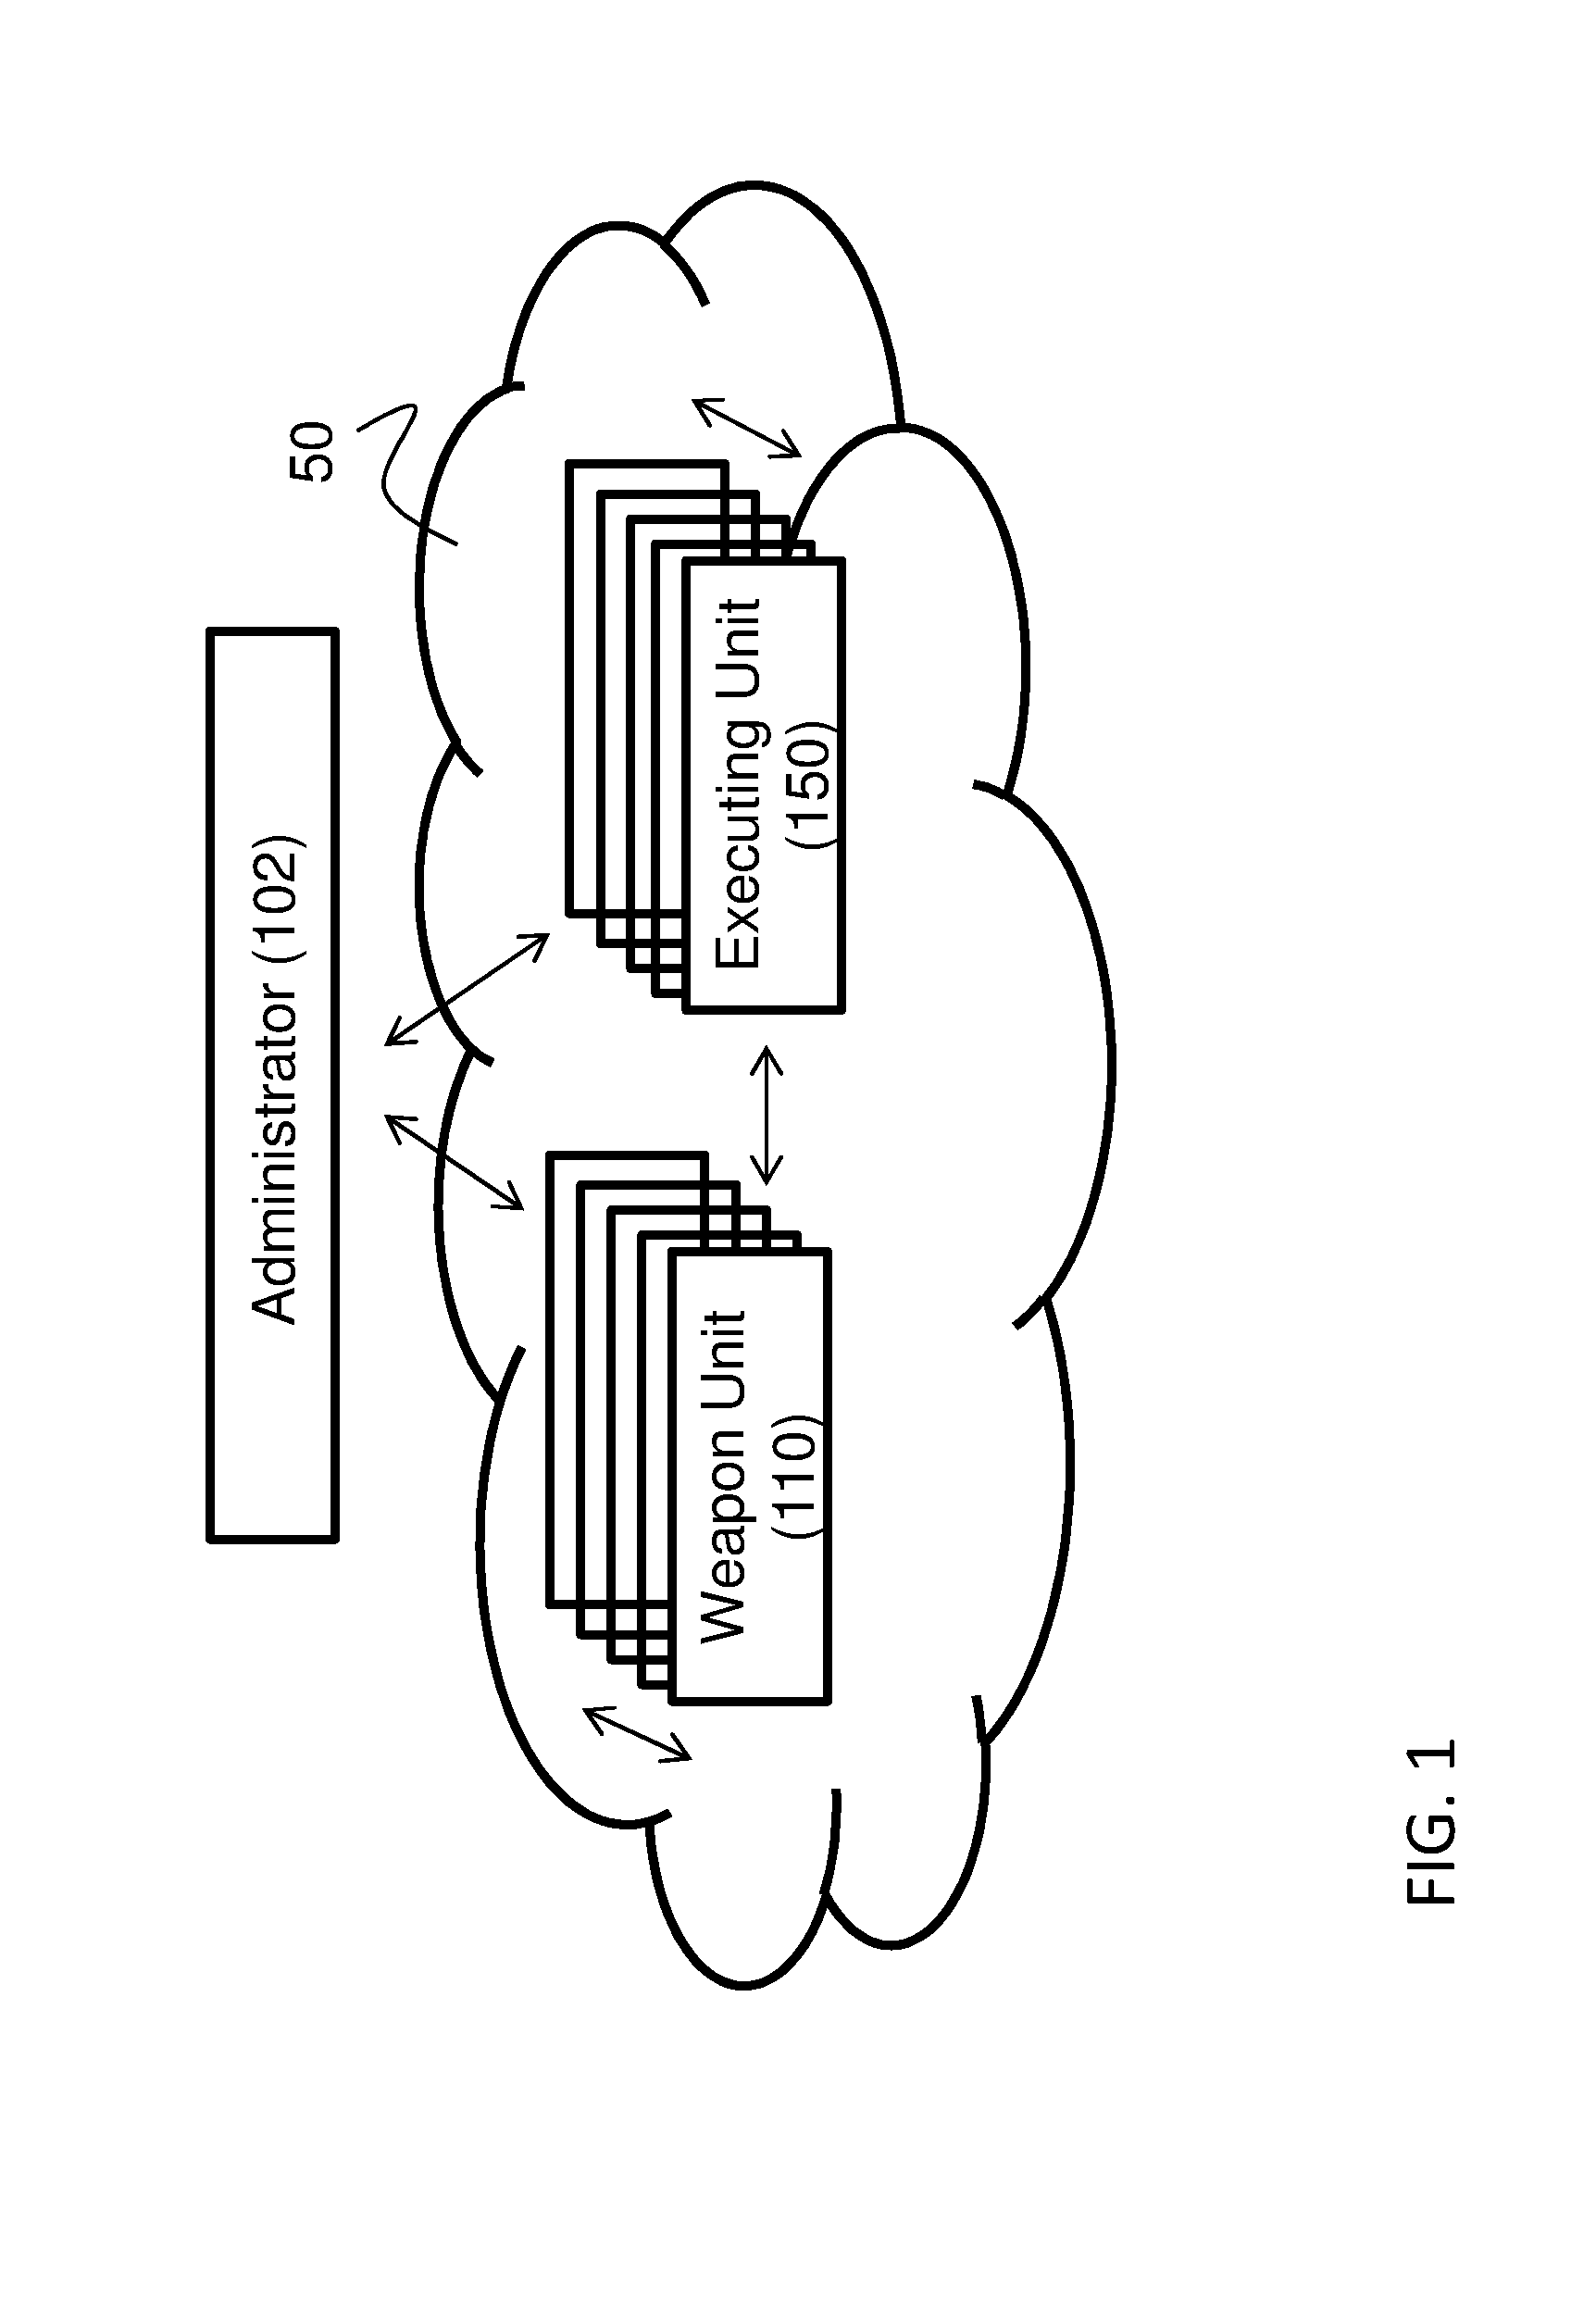 System, device and method for the prevention of friendly fire incidents